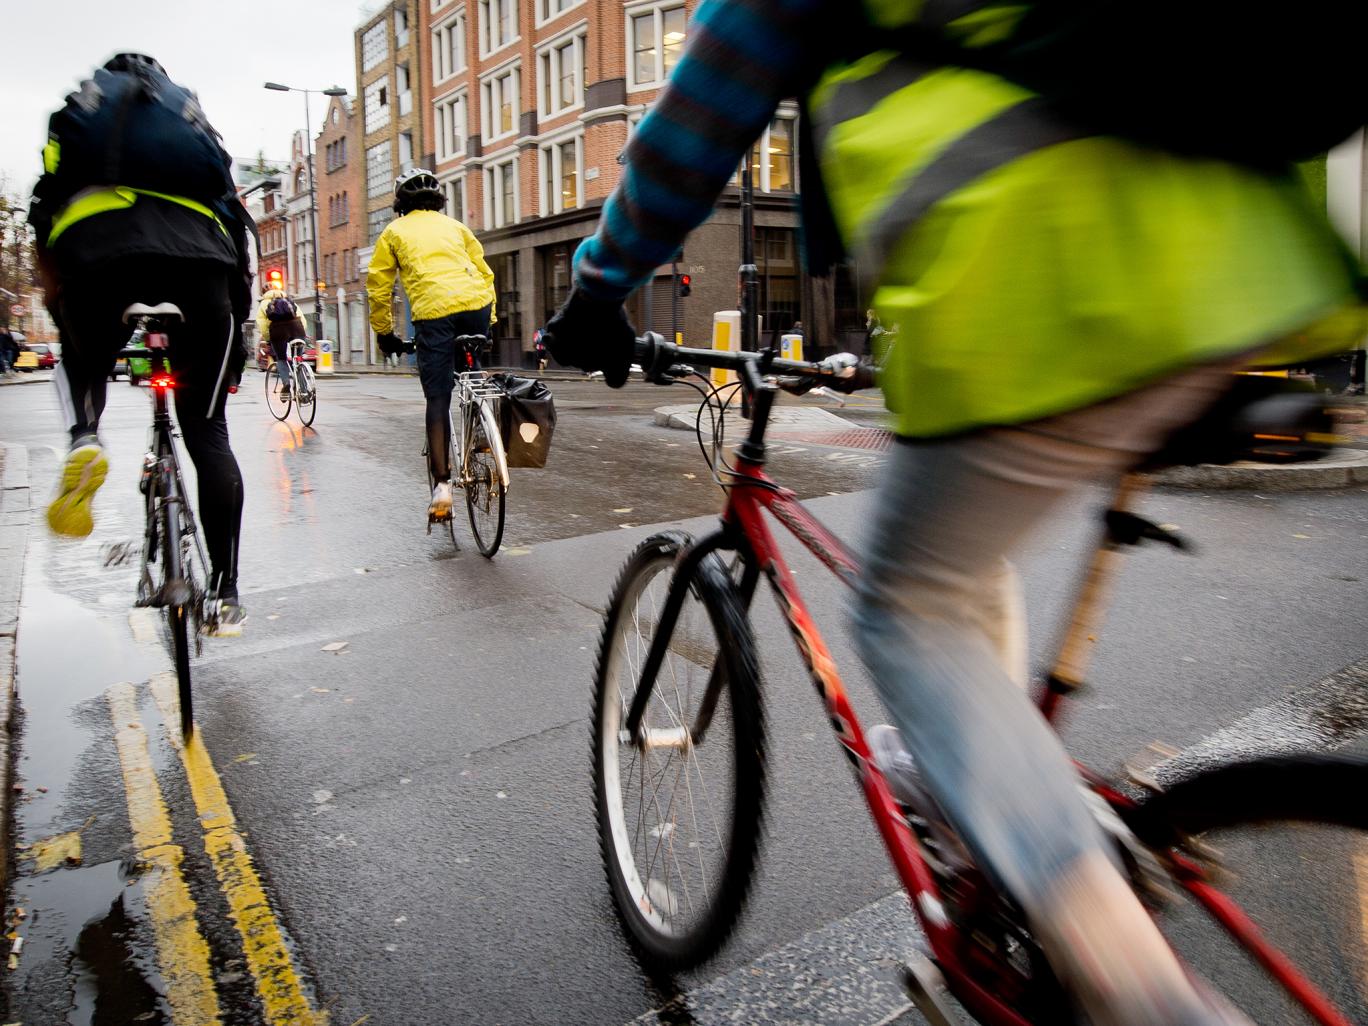 Cycling laws are to be reviewed